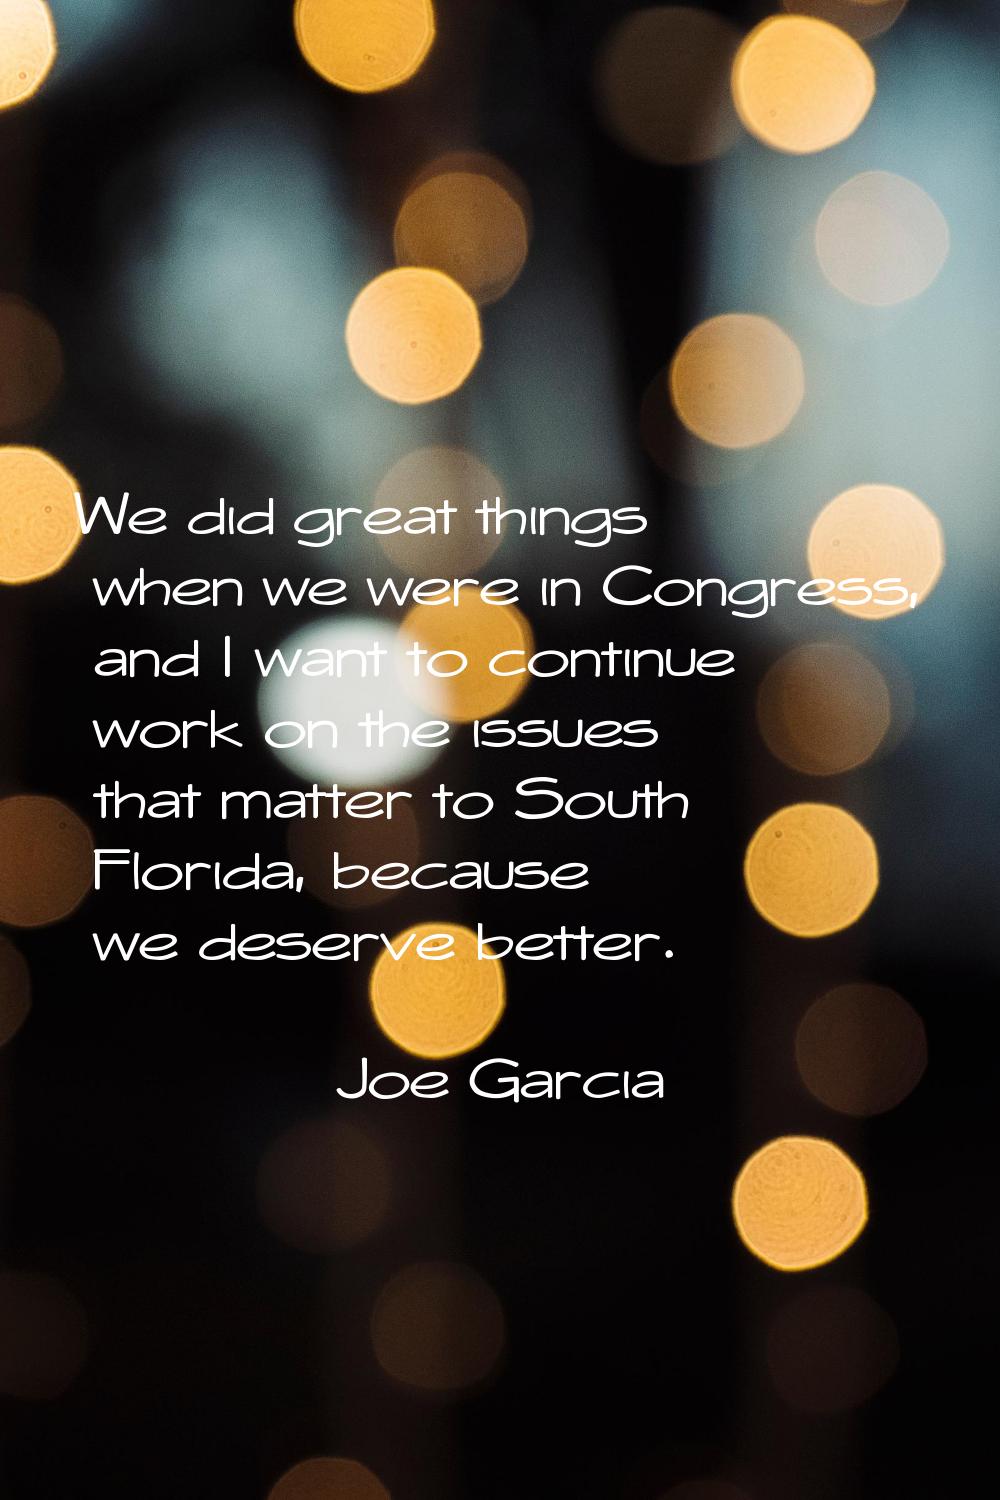 We did great things when we were in Congress, and I want to continue work on the issues that matter